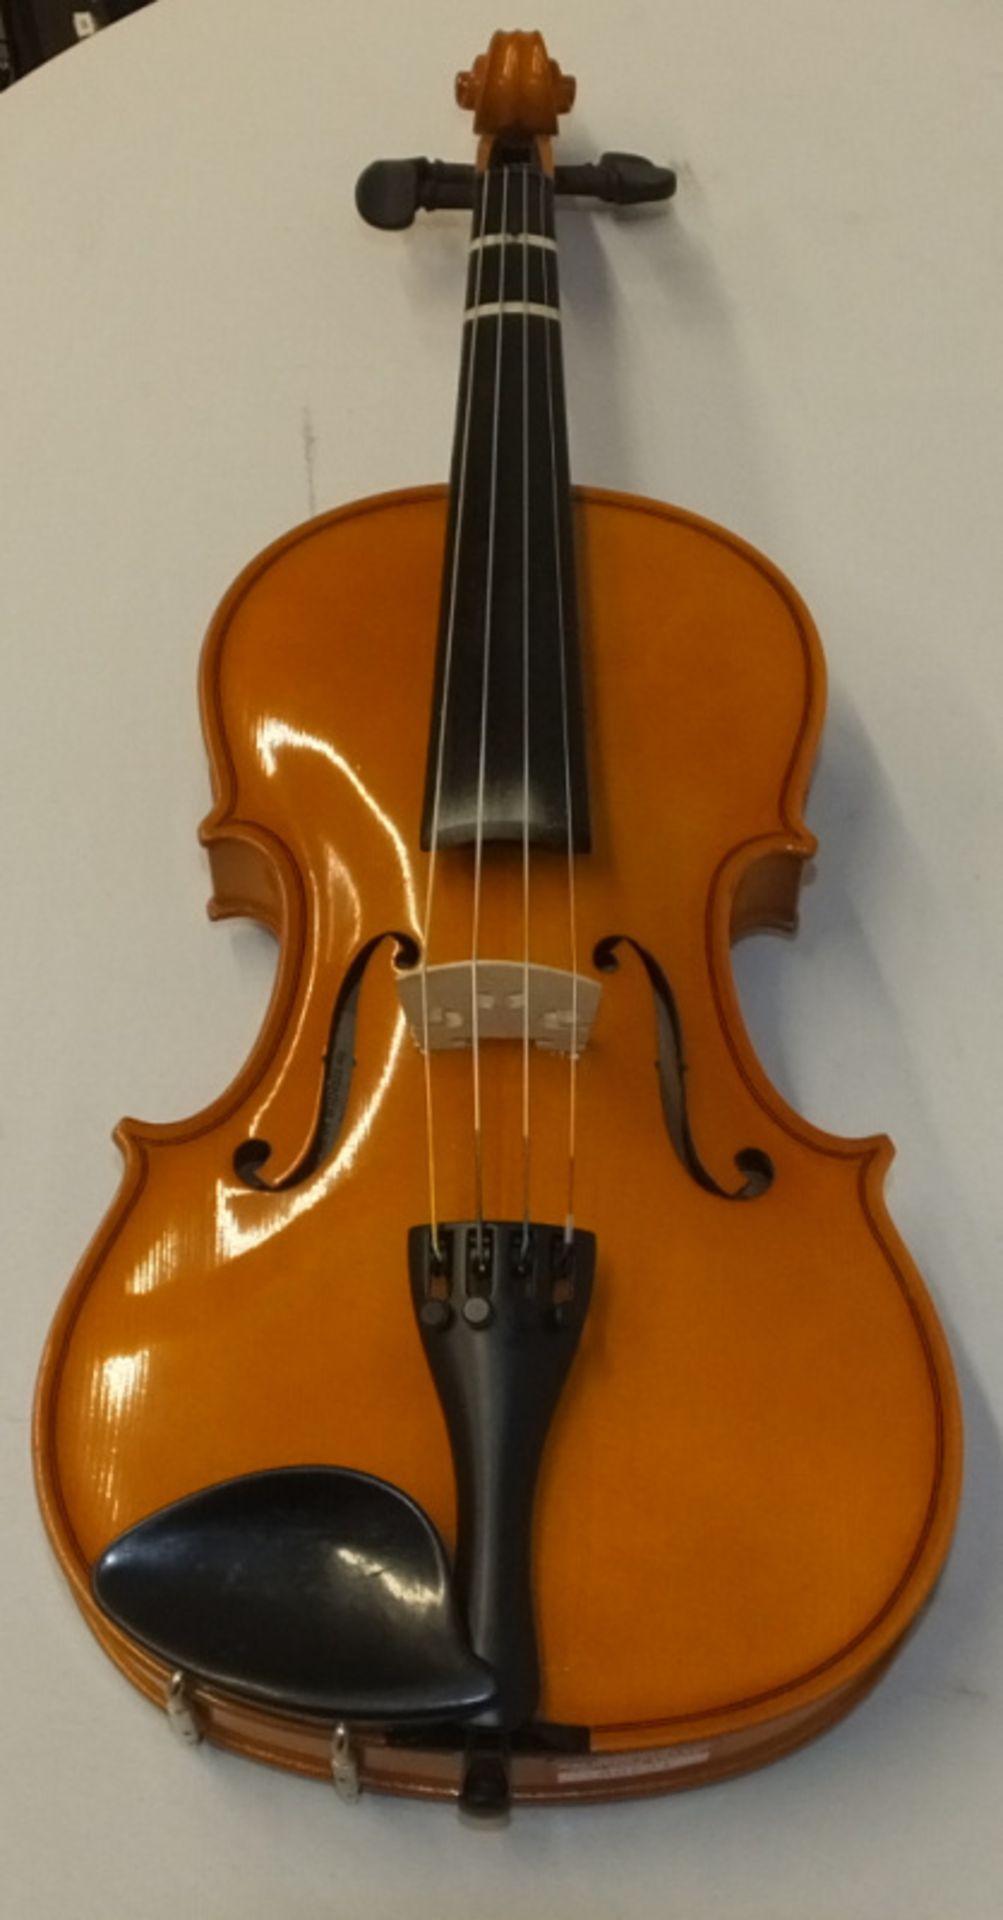 Andreas Zeller Violin & Case - Please check photos carefully for damaged or missing components - Image 3 of 17